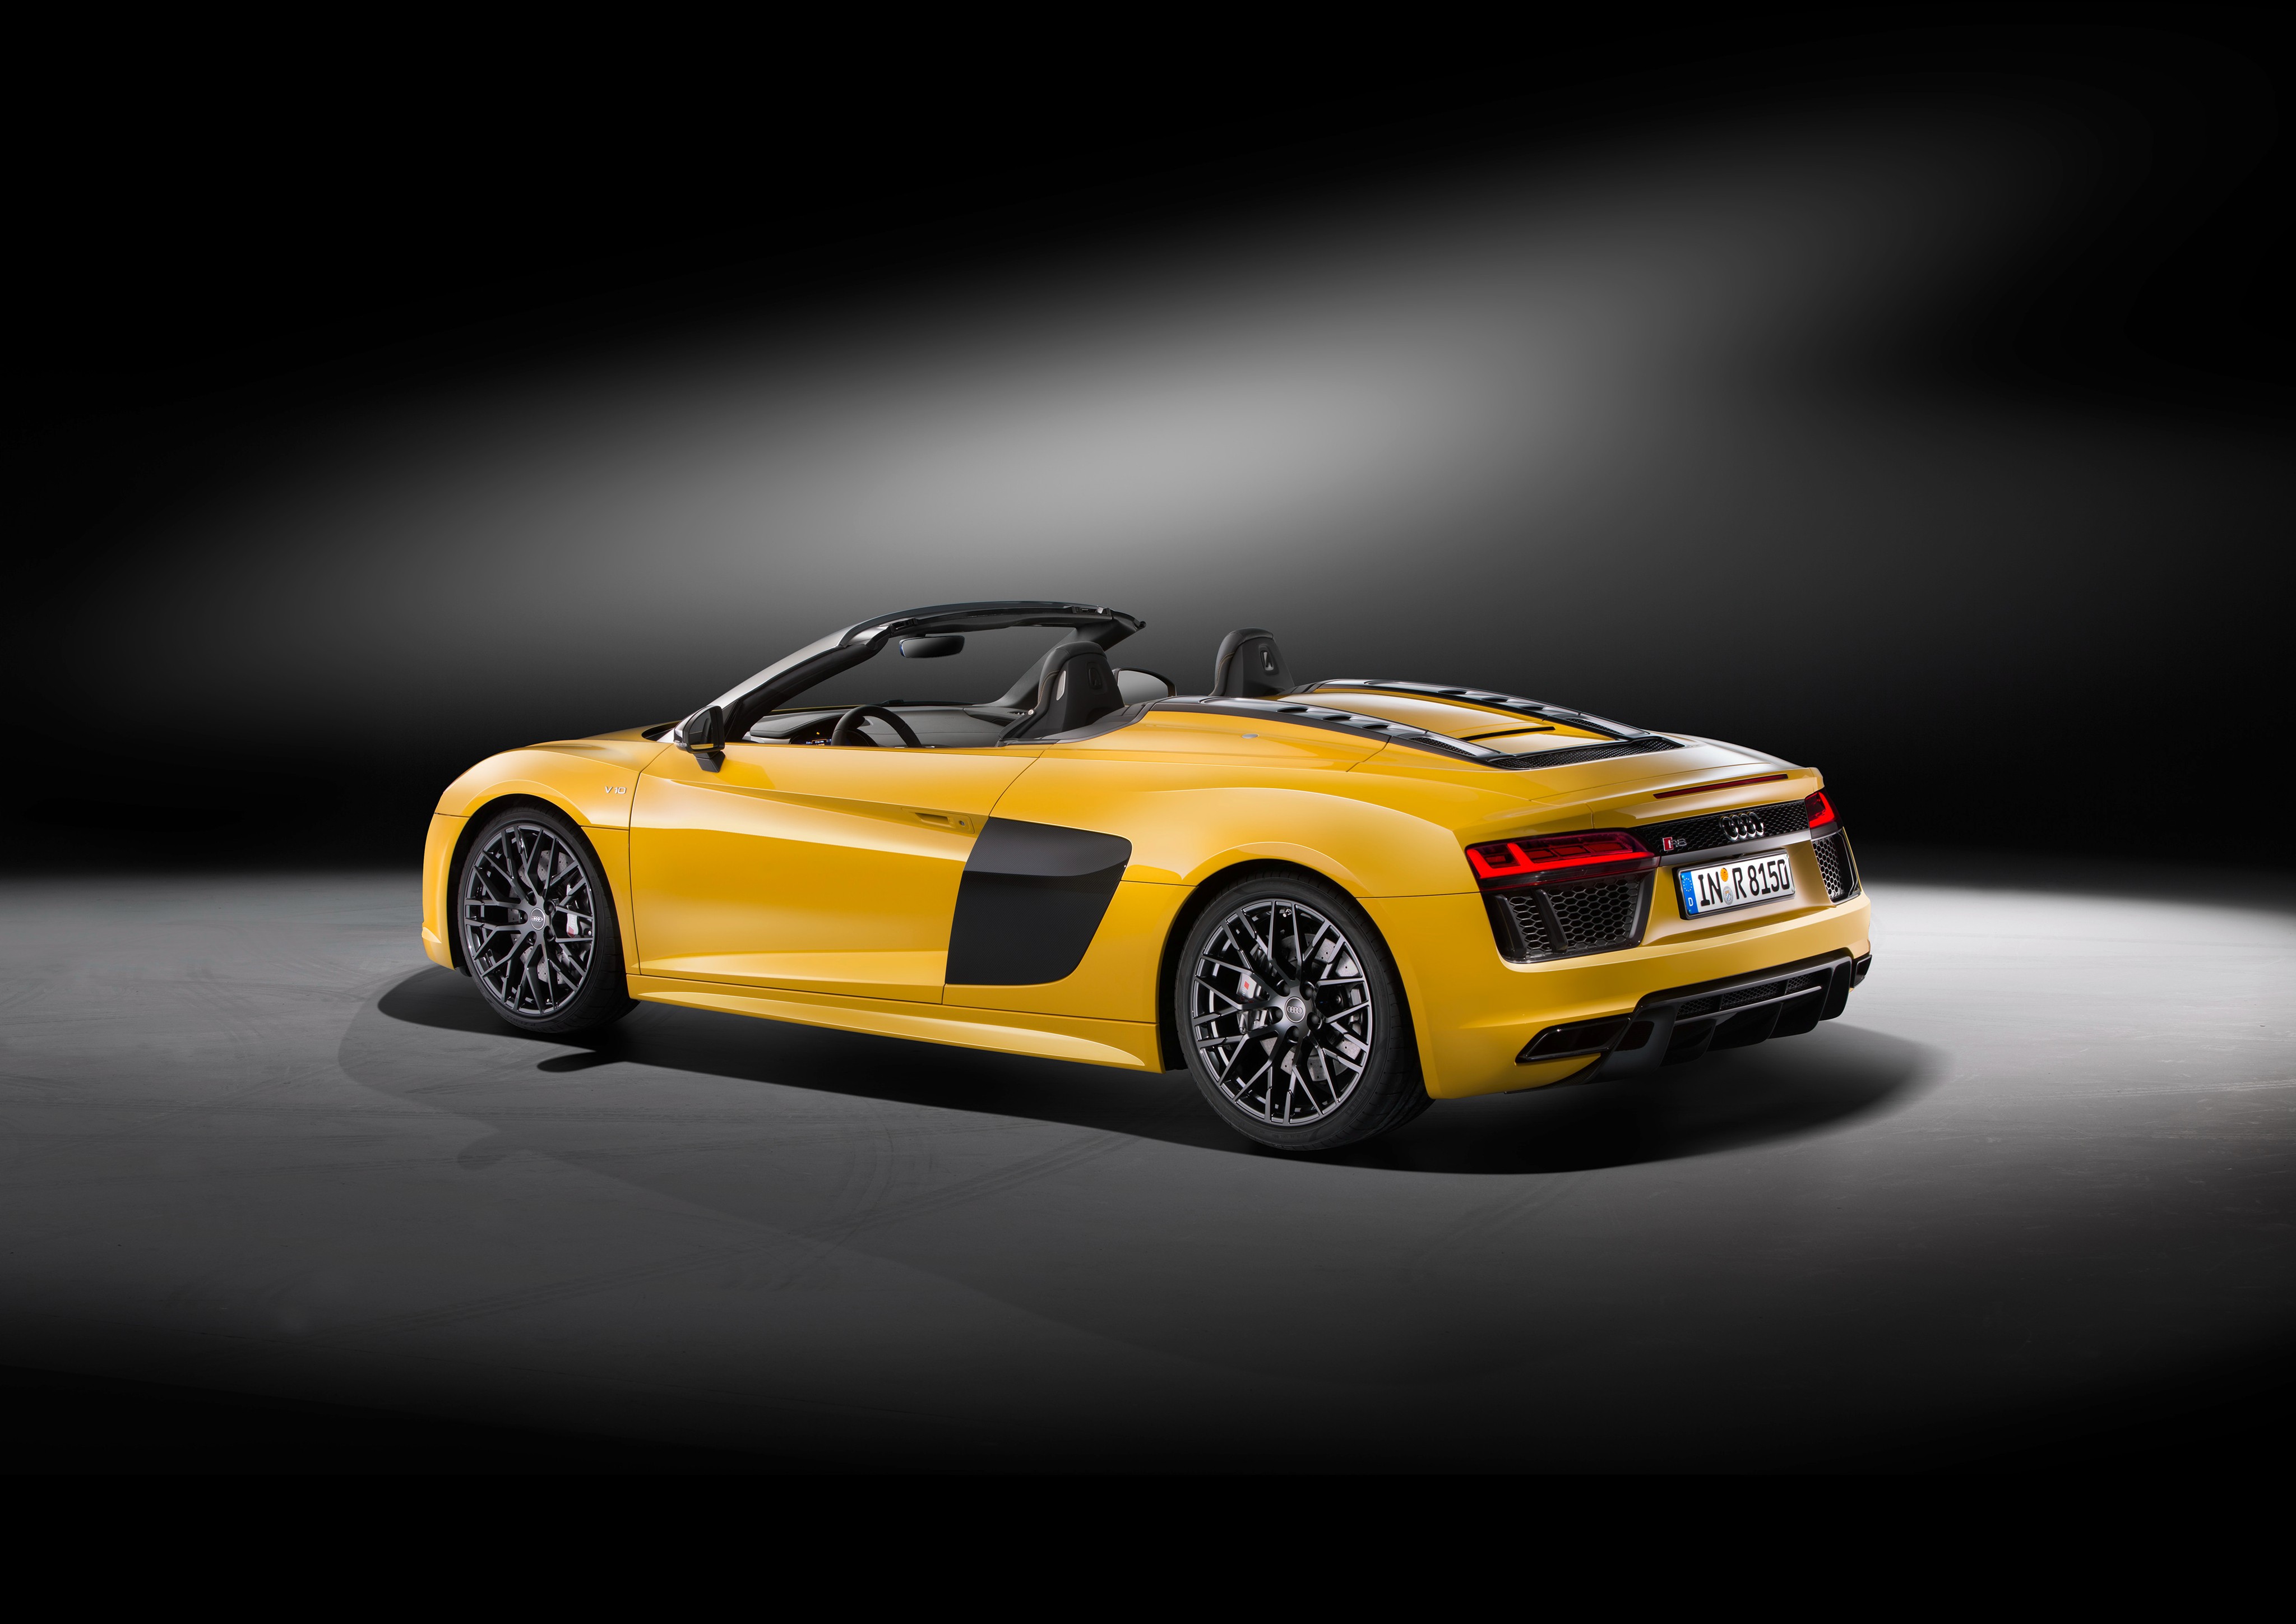 2017 Audi R8 Spyder Price Set From €179,000 in Germany  autoevolution